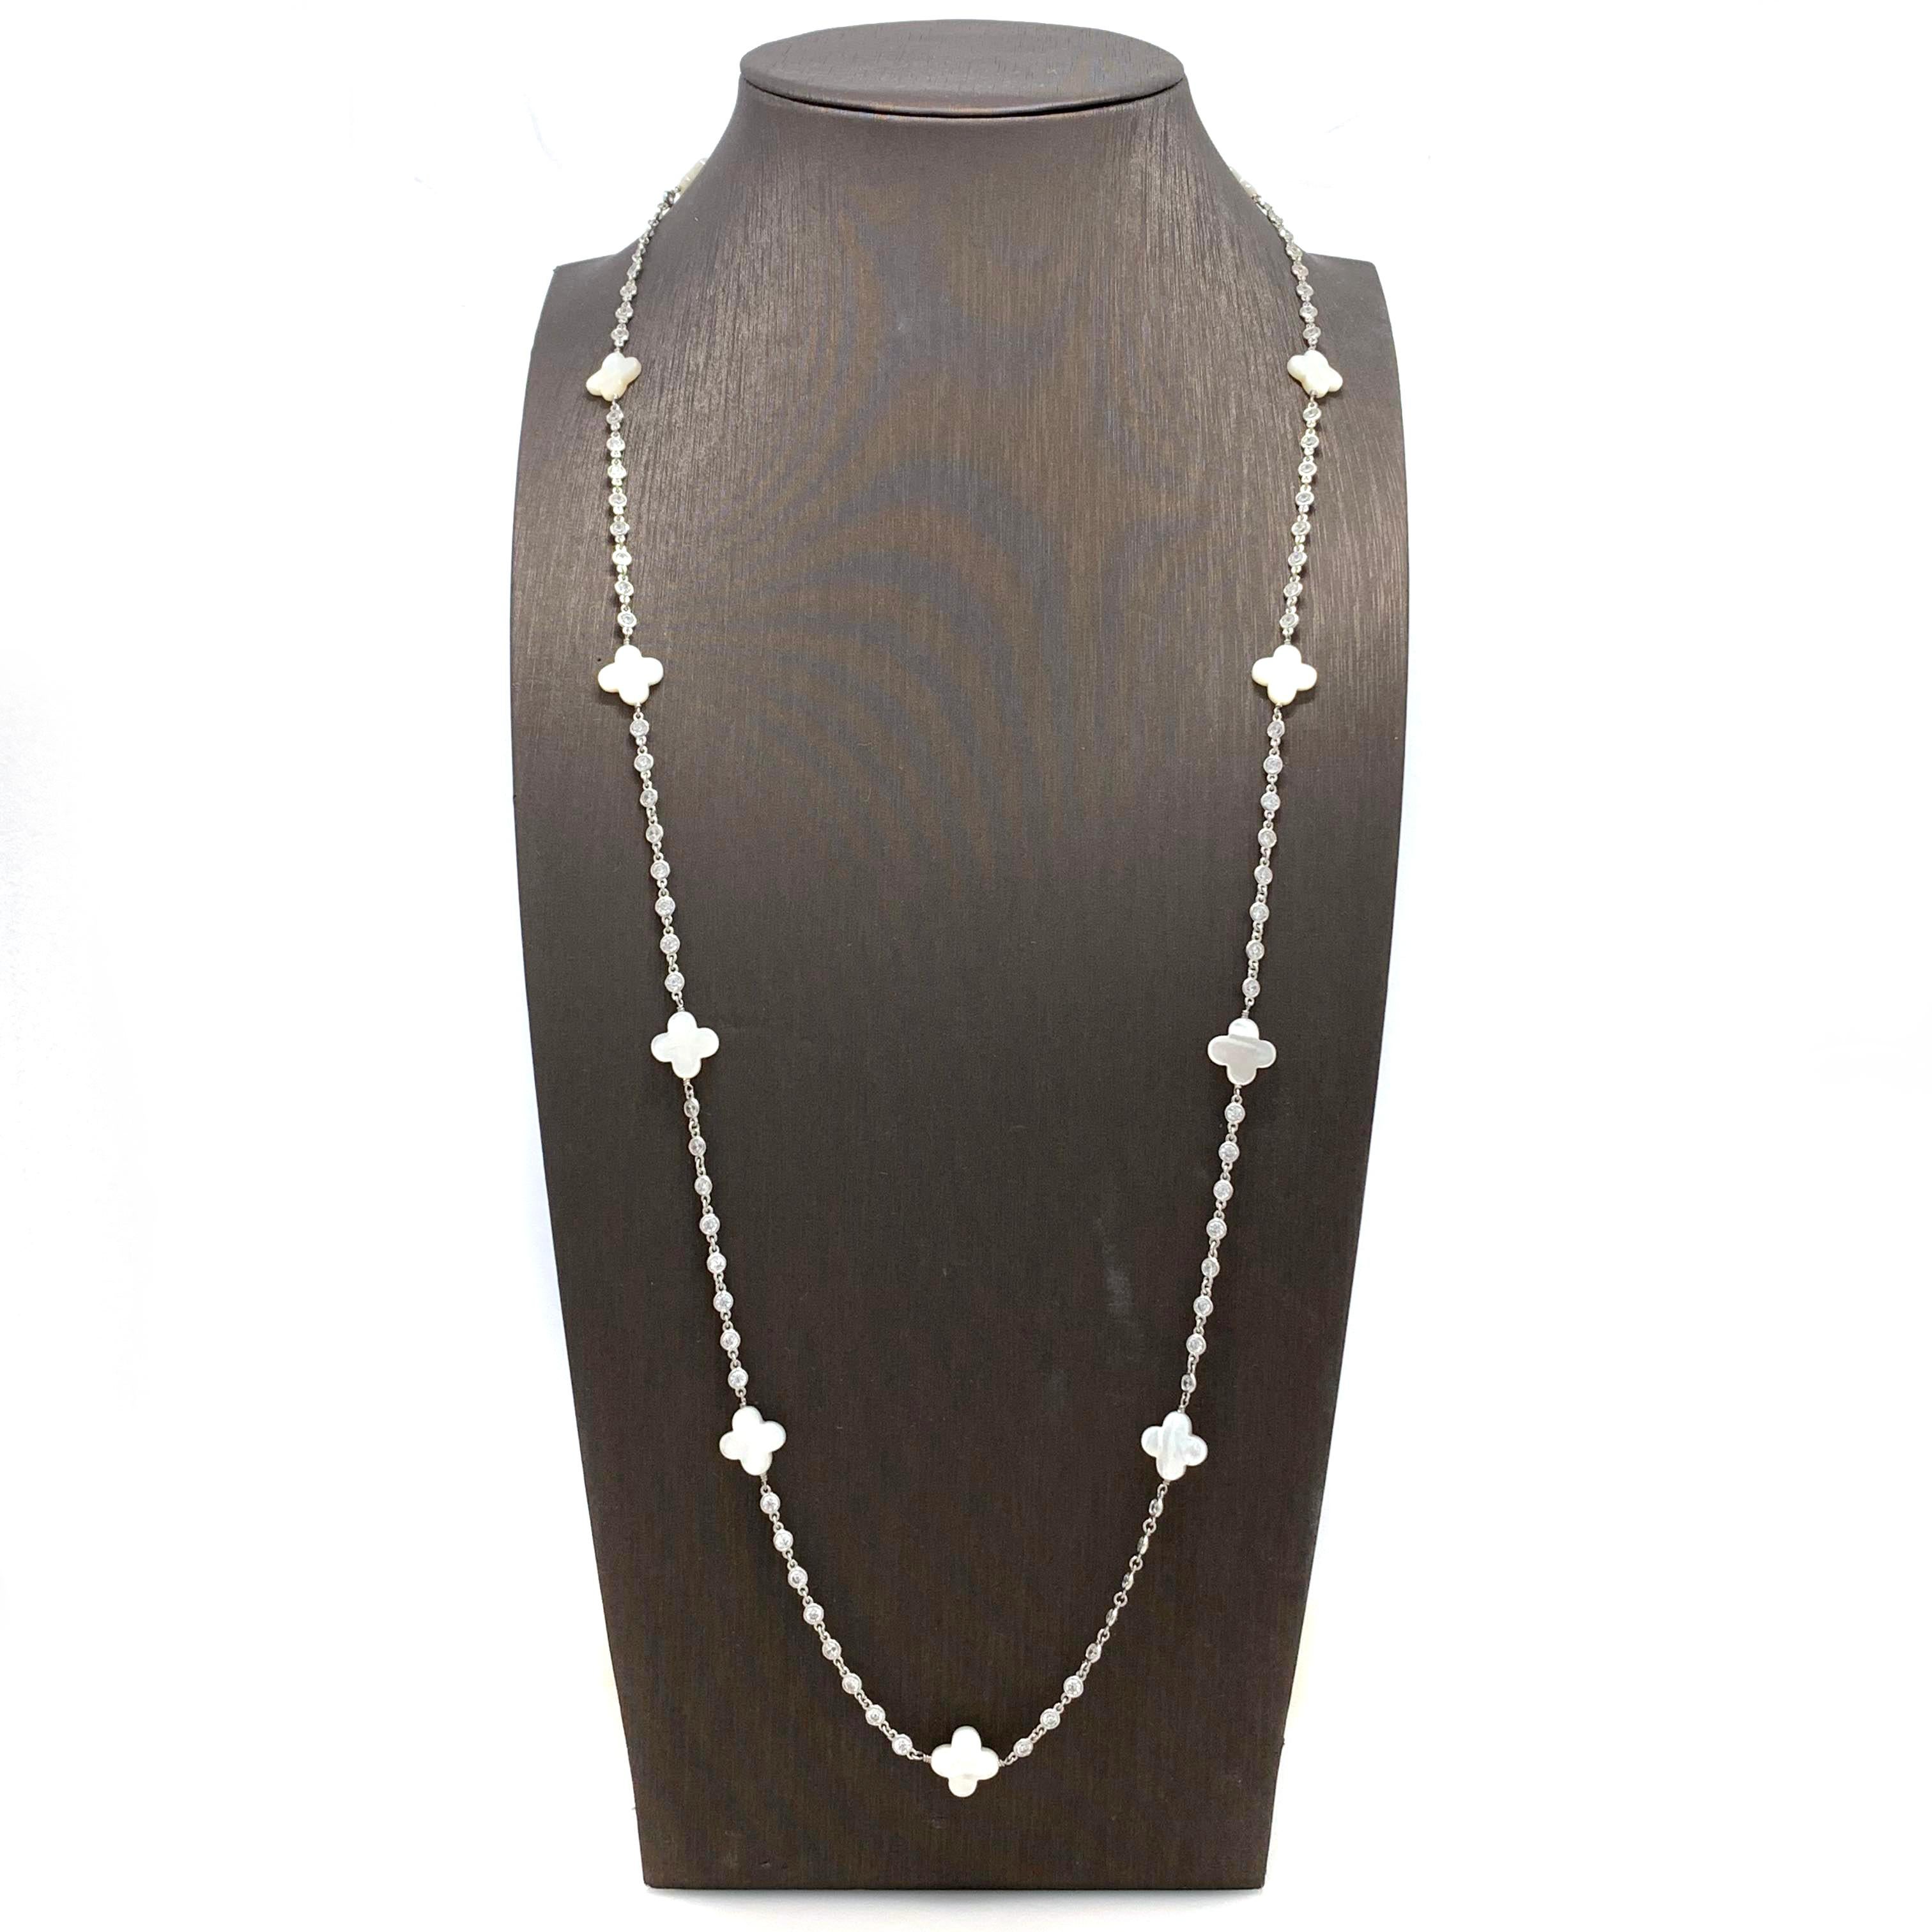 Mother of Pearl Clover Sterling Silver Long Station Necklace

The beautiful elegant necklace features 11 pieces of clover-shape mother of pearl and continuous of hand bezel-set faceted simulated diamond cz (0.10ct size each - 9.60ct size total), all